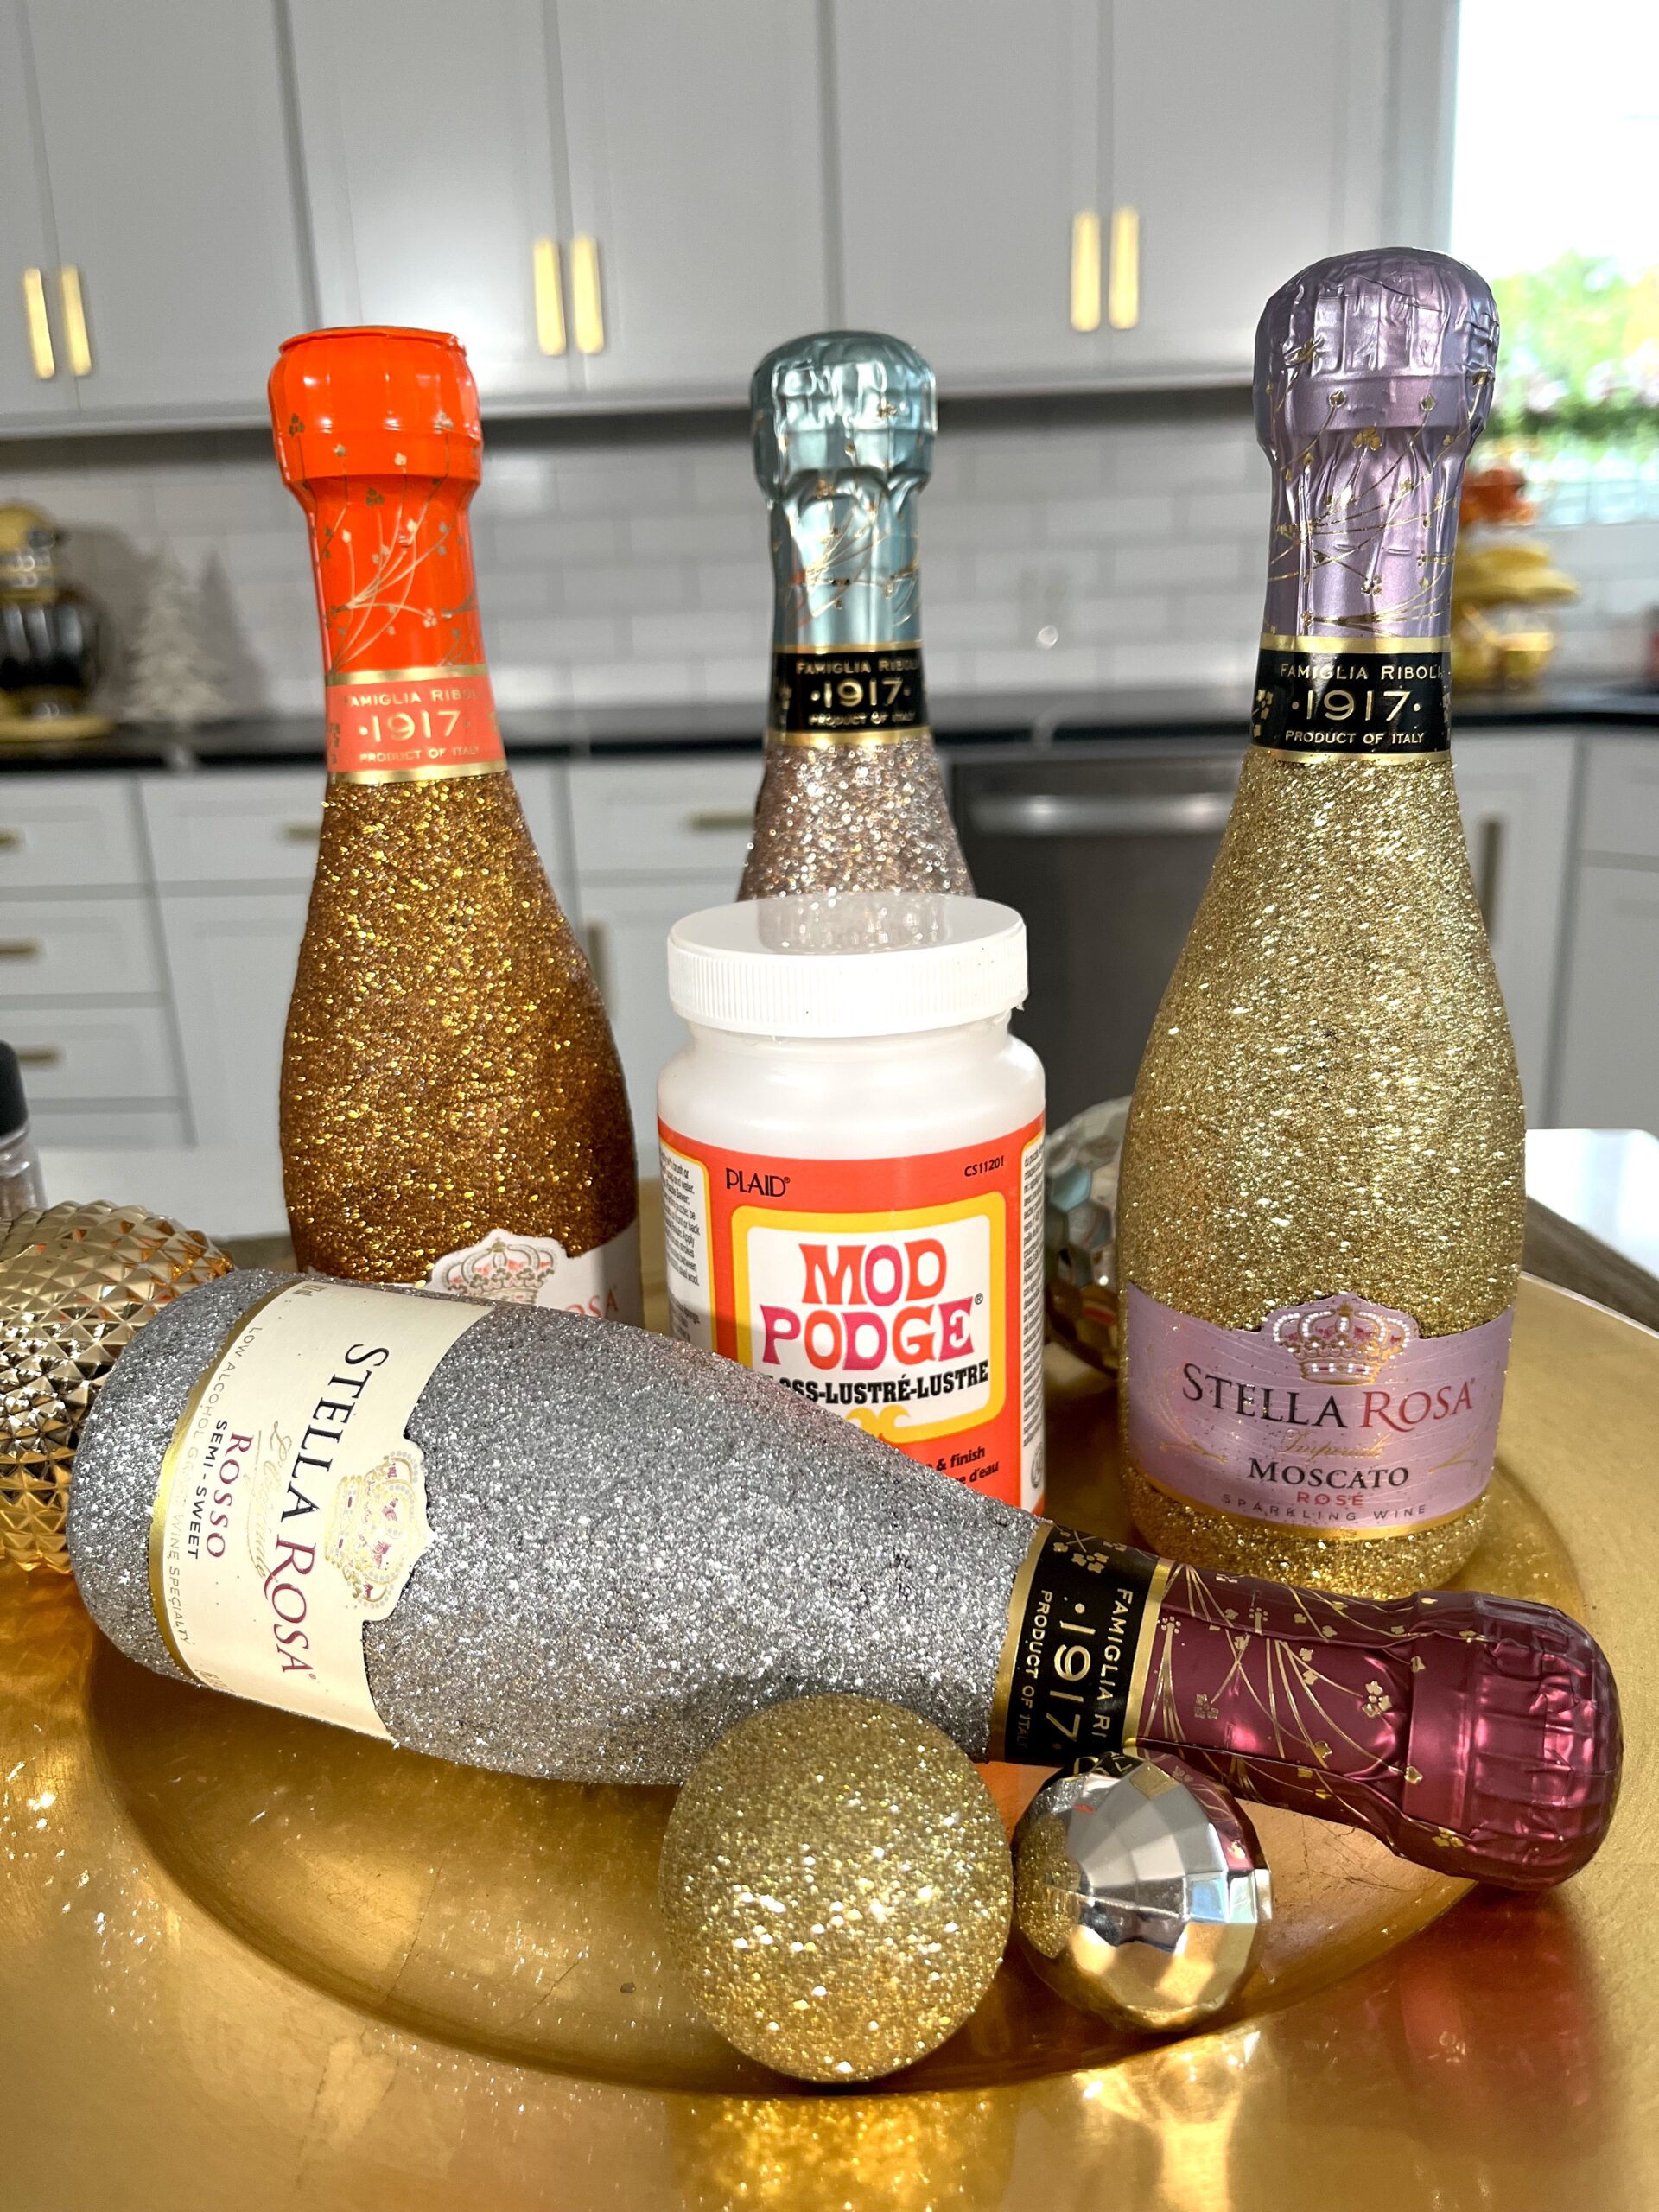 How to Glitter Wine Bottles with Mod Podge - CATHIE FILIAN's